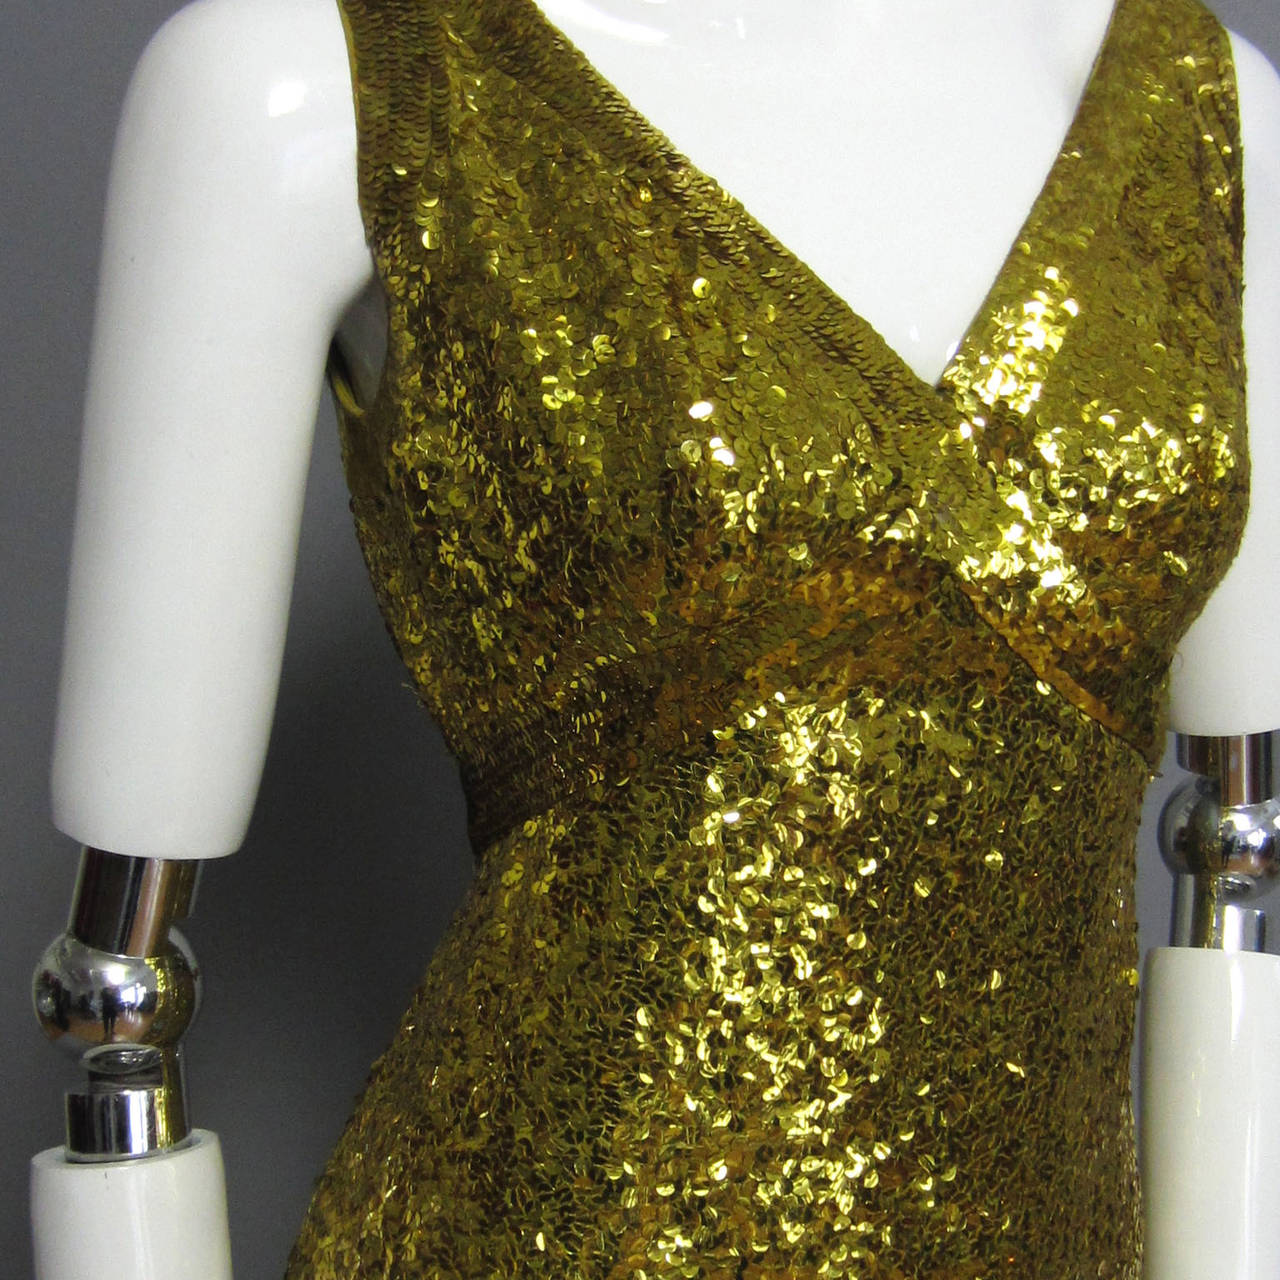 Not gold, not green, these marvelous sequins are a color in between: chartreuse is the closest color that applies. Fully covered in sequins, this LILLIE RUBIN dress is made of a stretch knit fabric and is lined in matching chartreuse chiffon. The